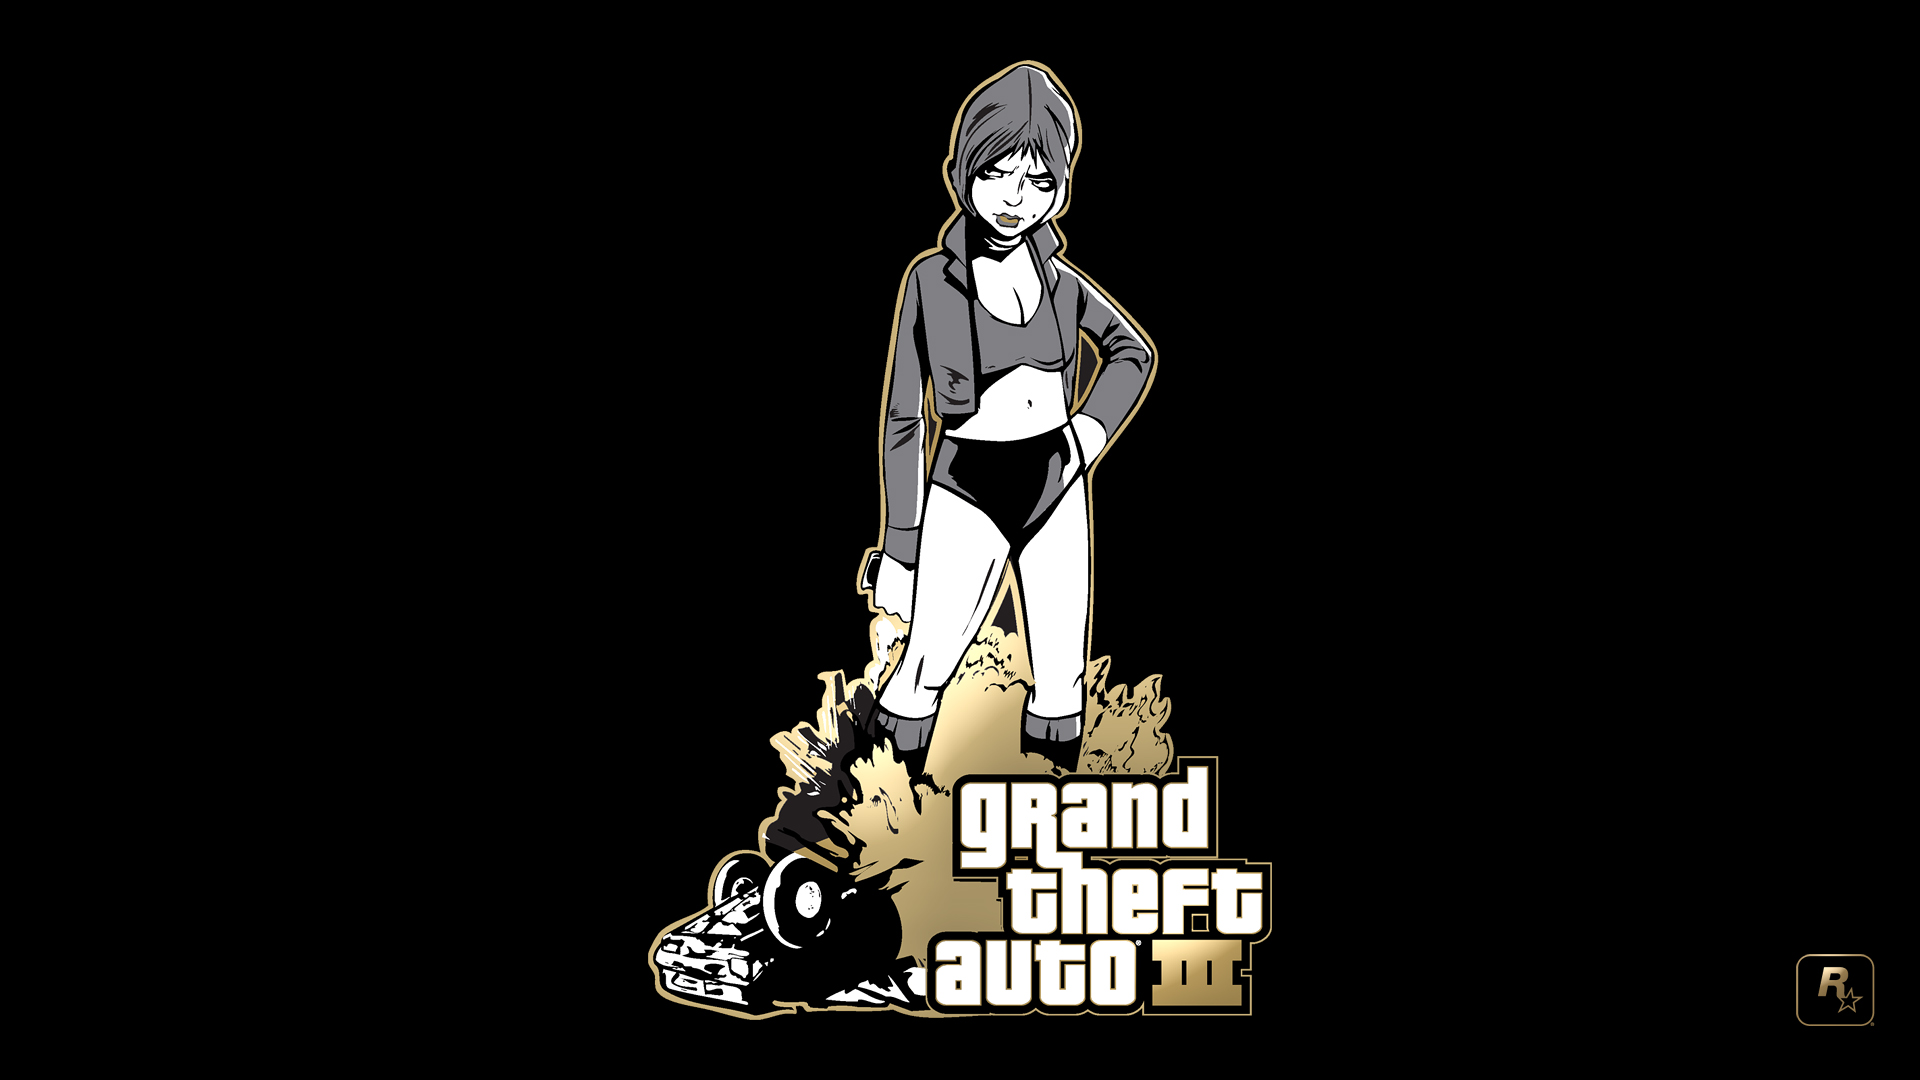 Let’s Play Grand Theft Auto III: The Definitive Edition